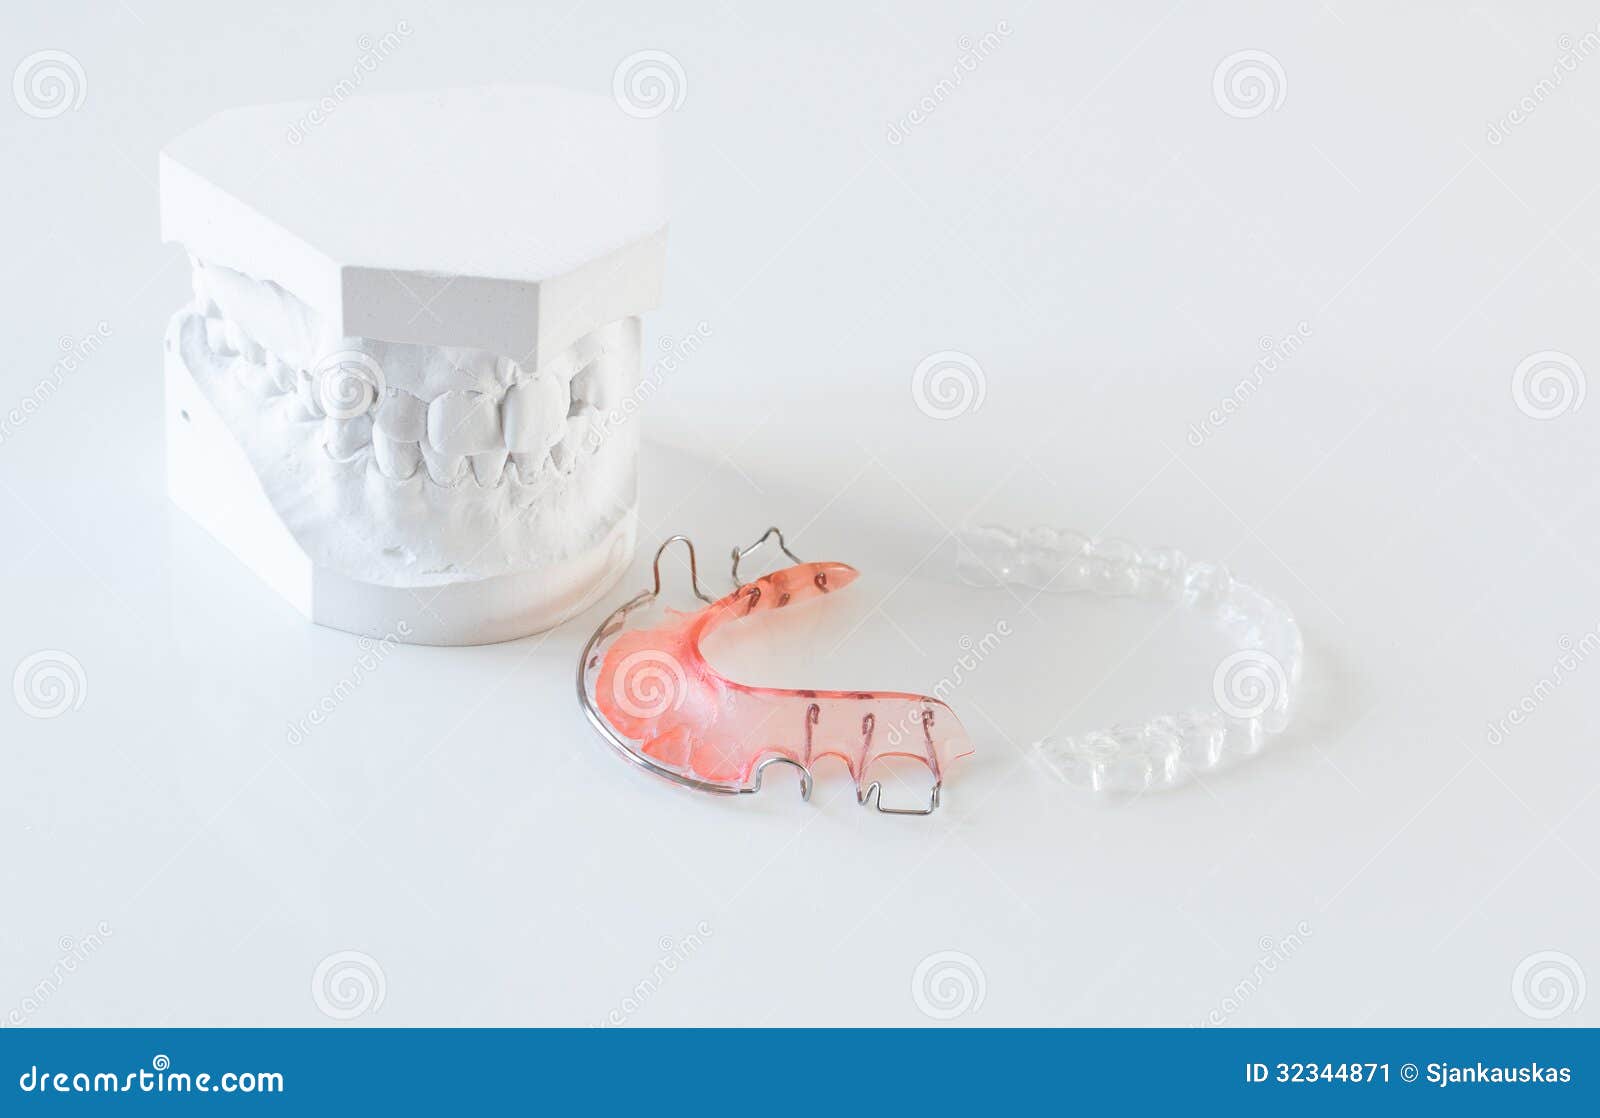 orthodontic braces and molds